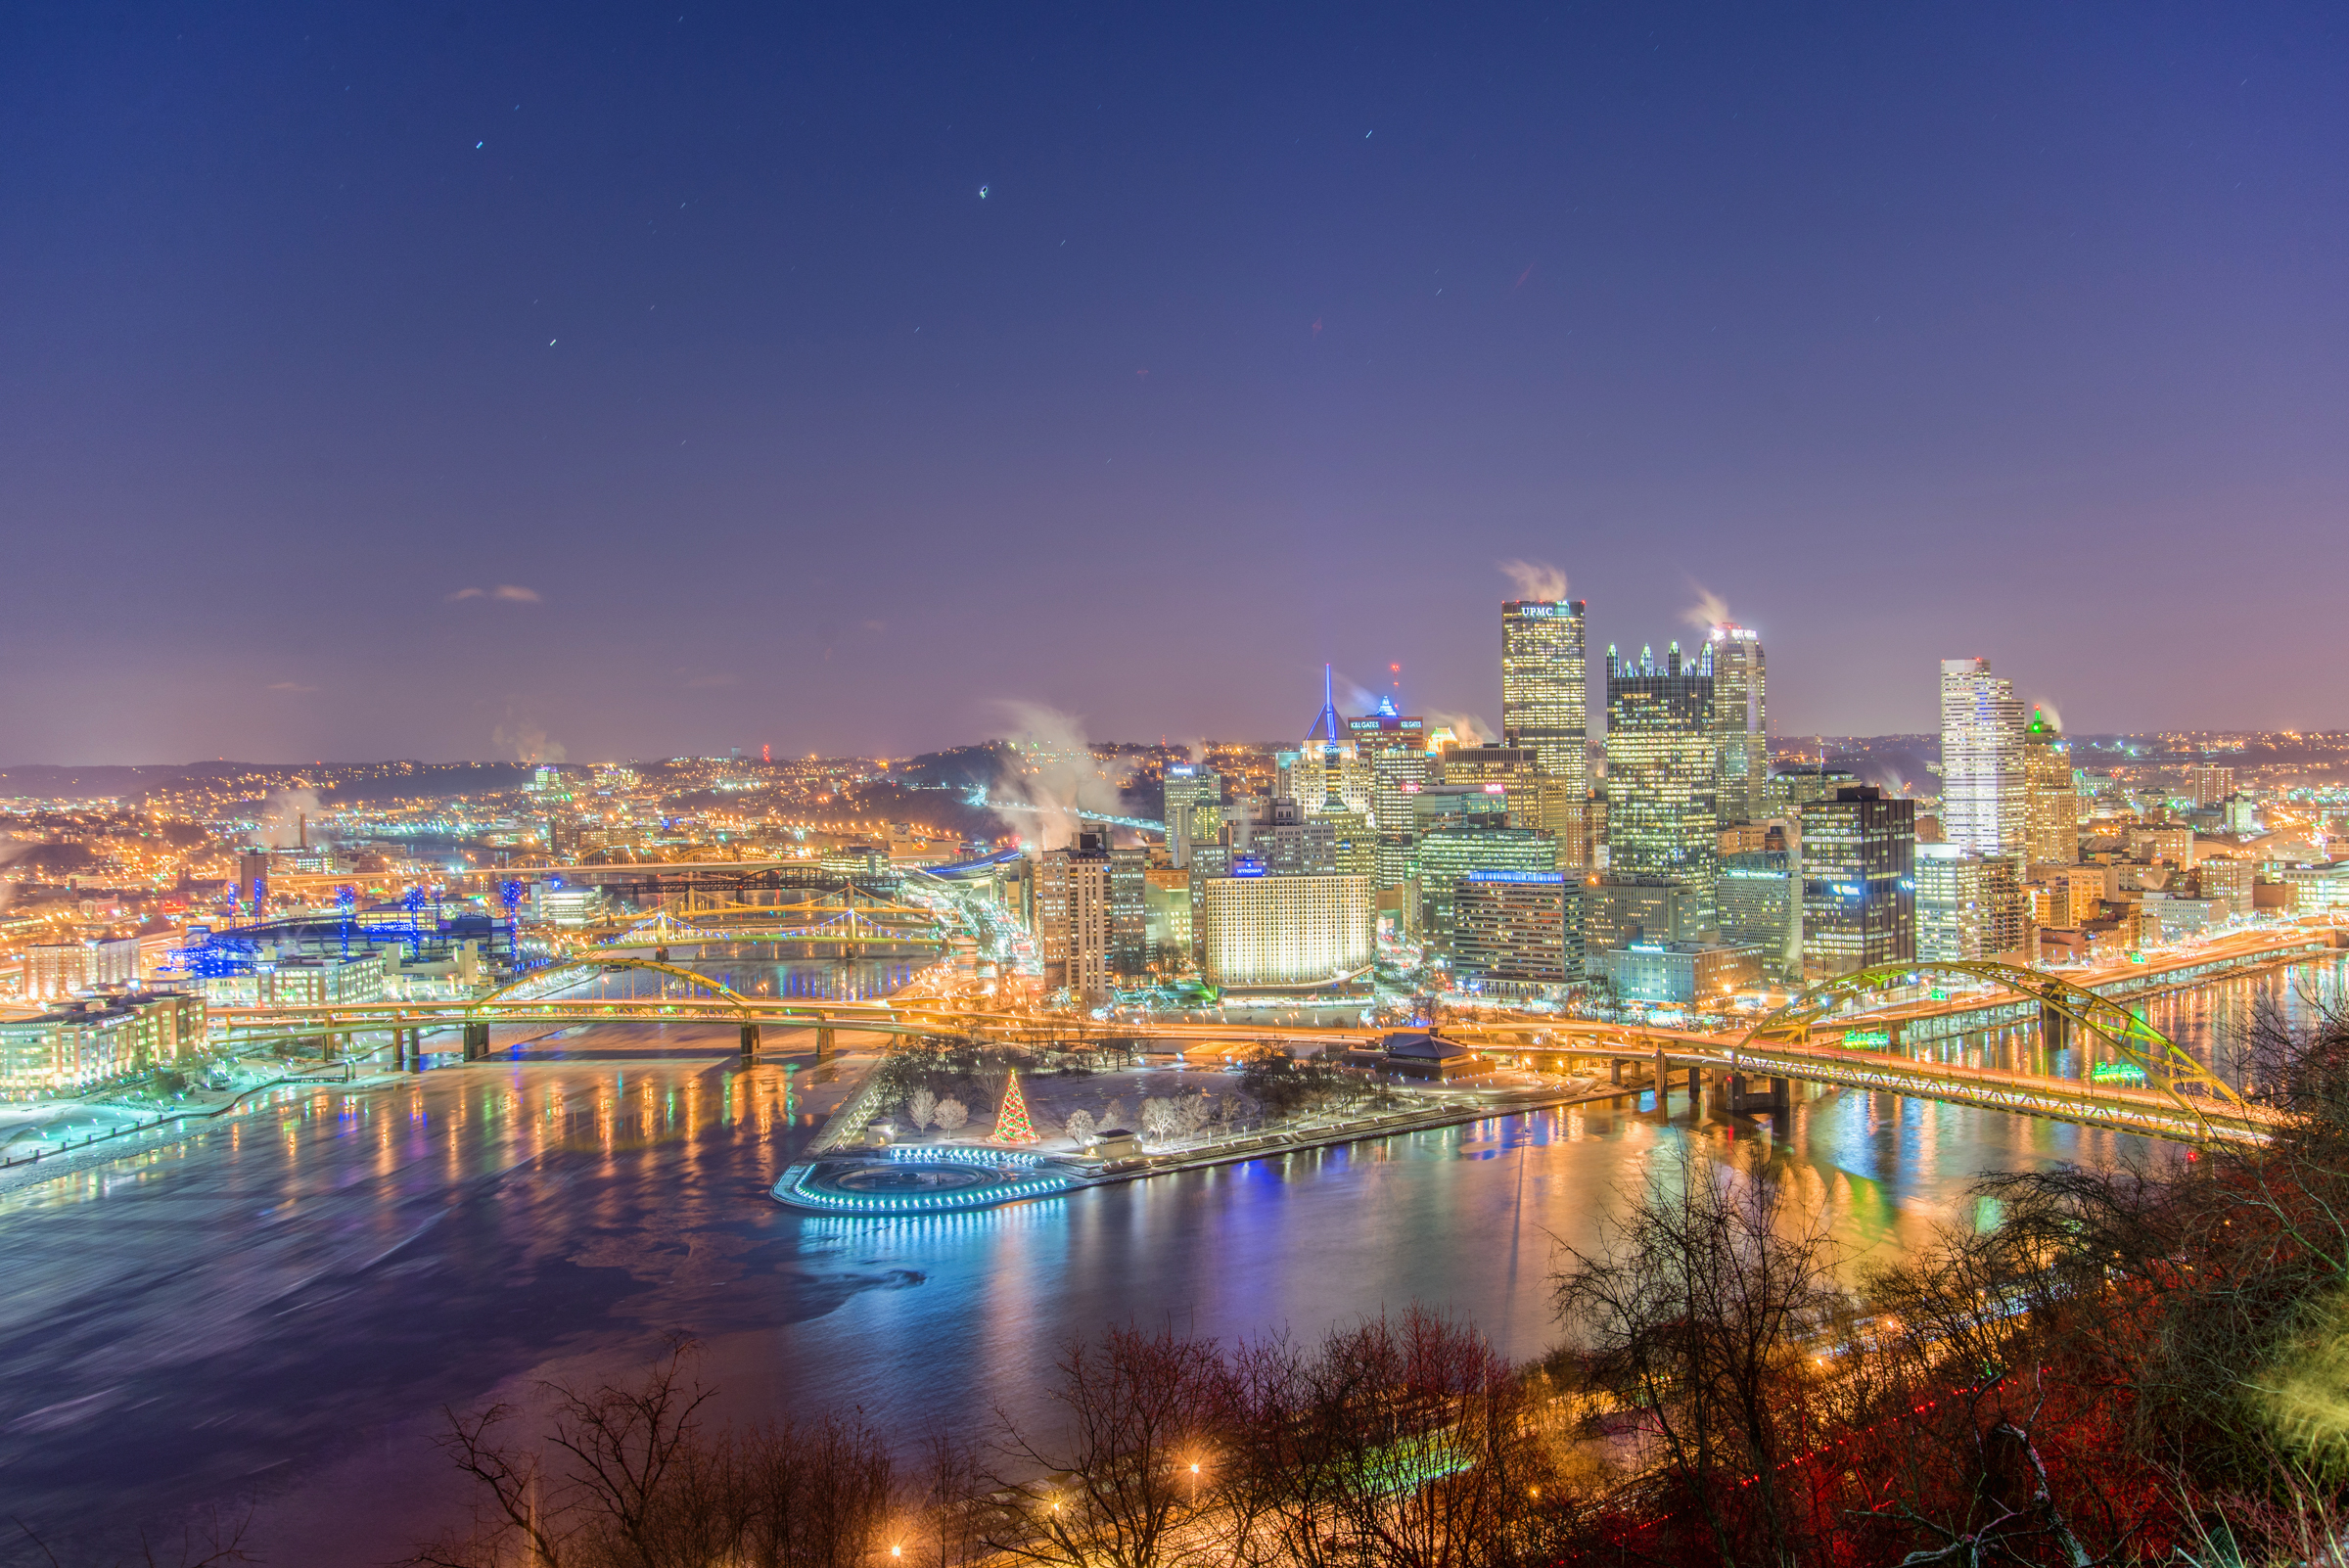 Icy rivers in Pittsburgh - Pittsburgh Photographer